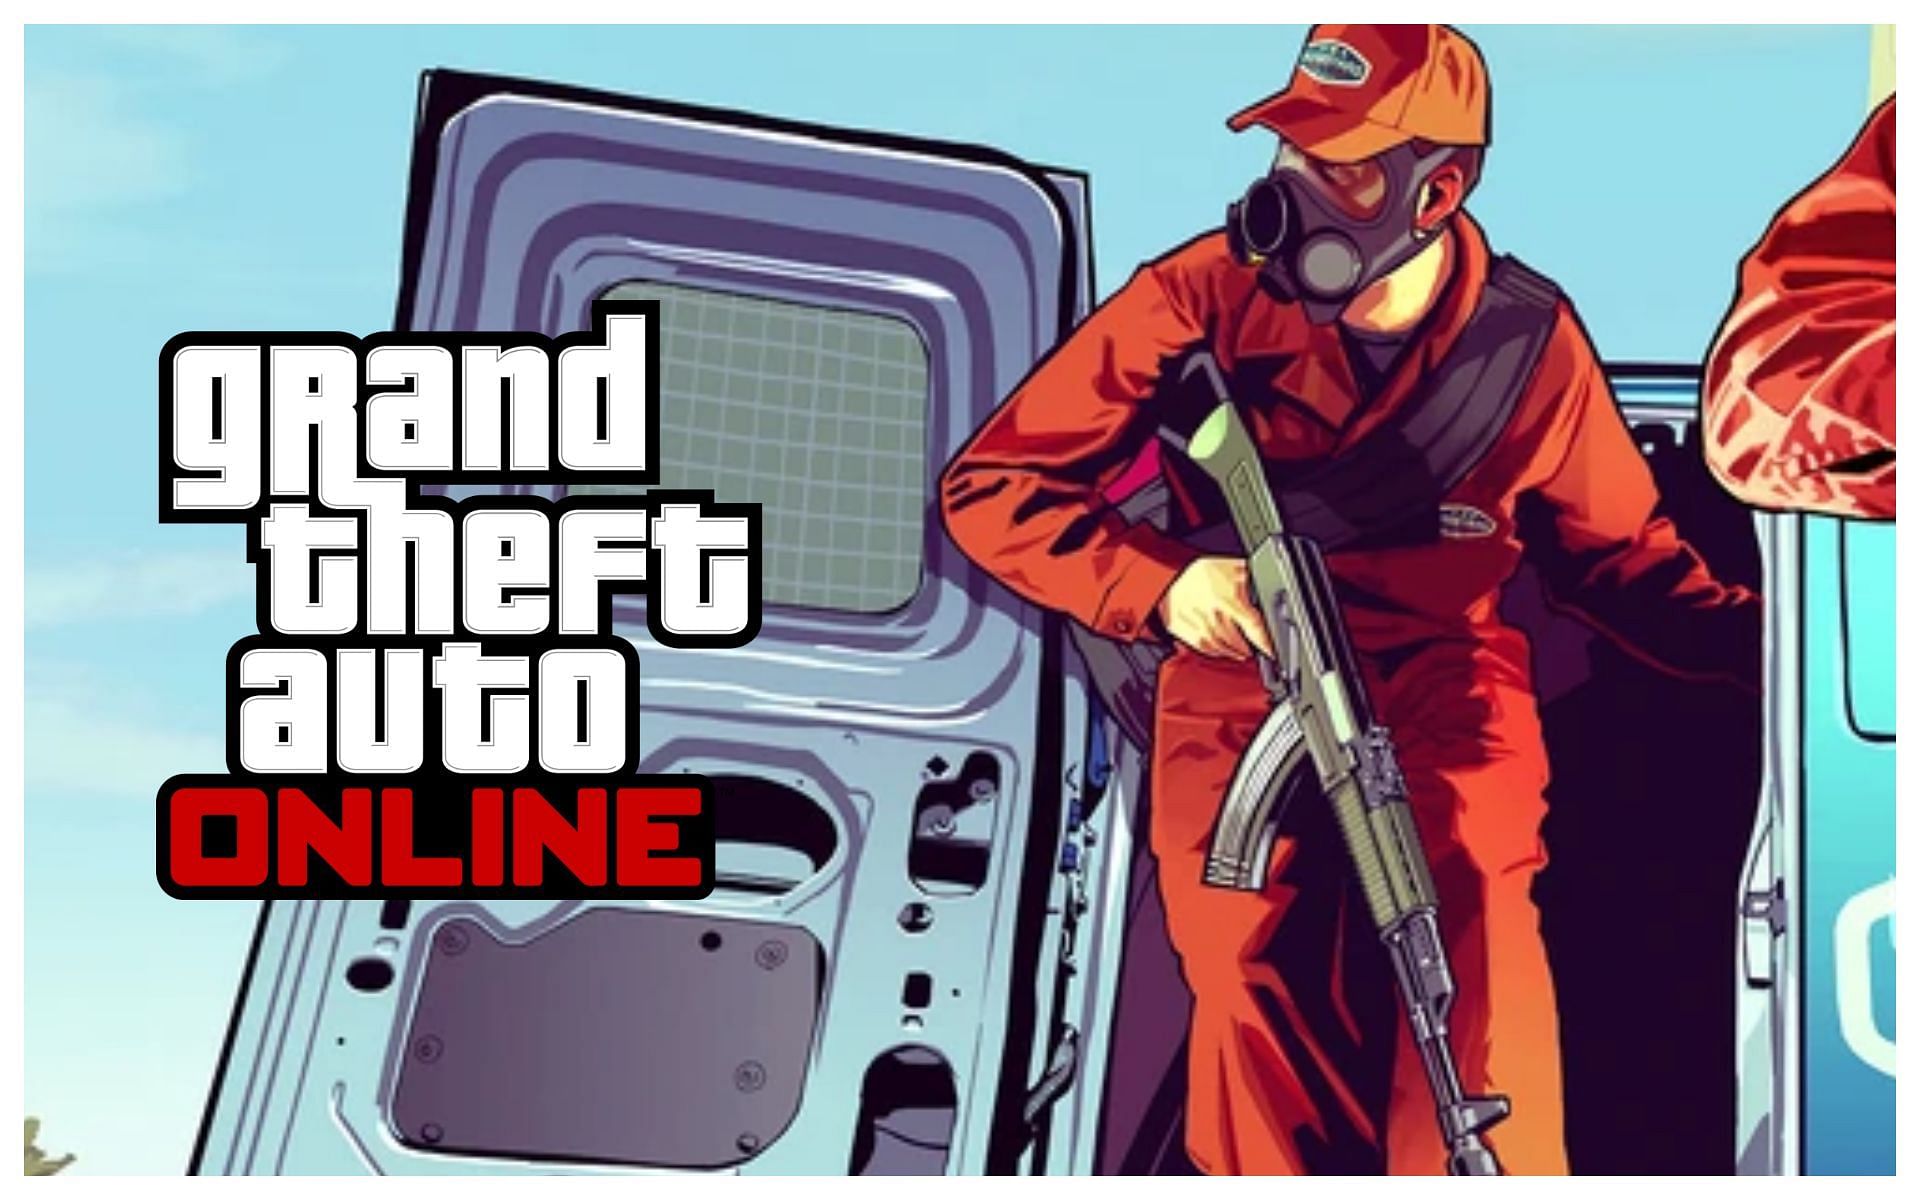 5 best ways to get money fast in GTA Online after The Last Dose